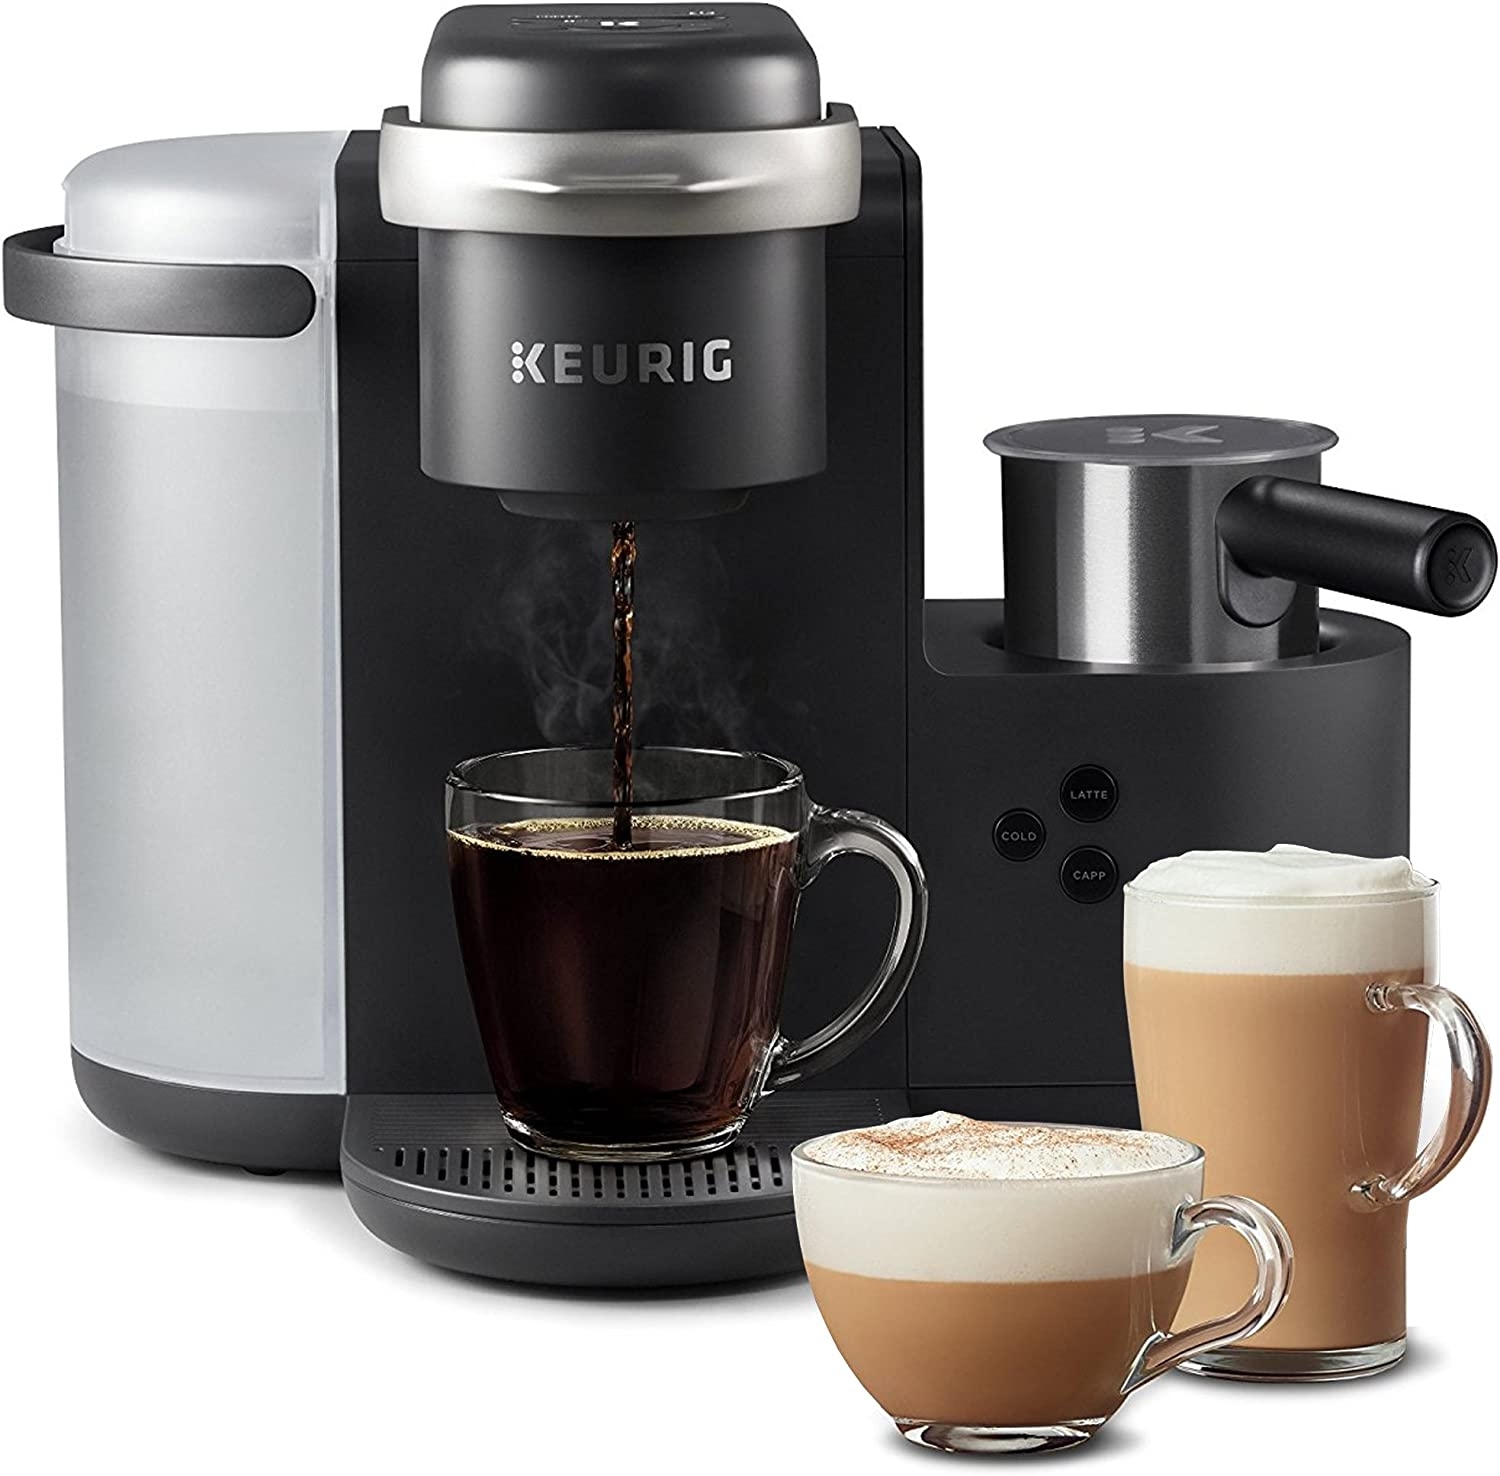 Keurig K-Café SMART Single Serve Coffee Maker with WiFi Compatibility, Latte and Cappuccino Machine with Built-In Frother, 6